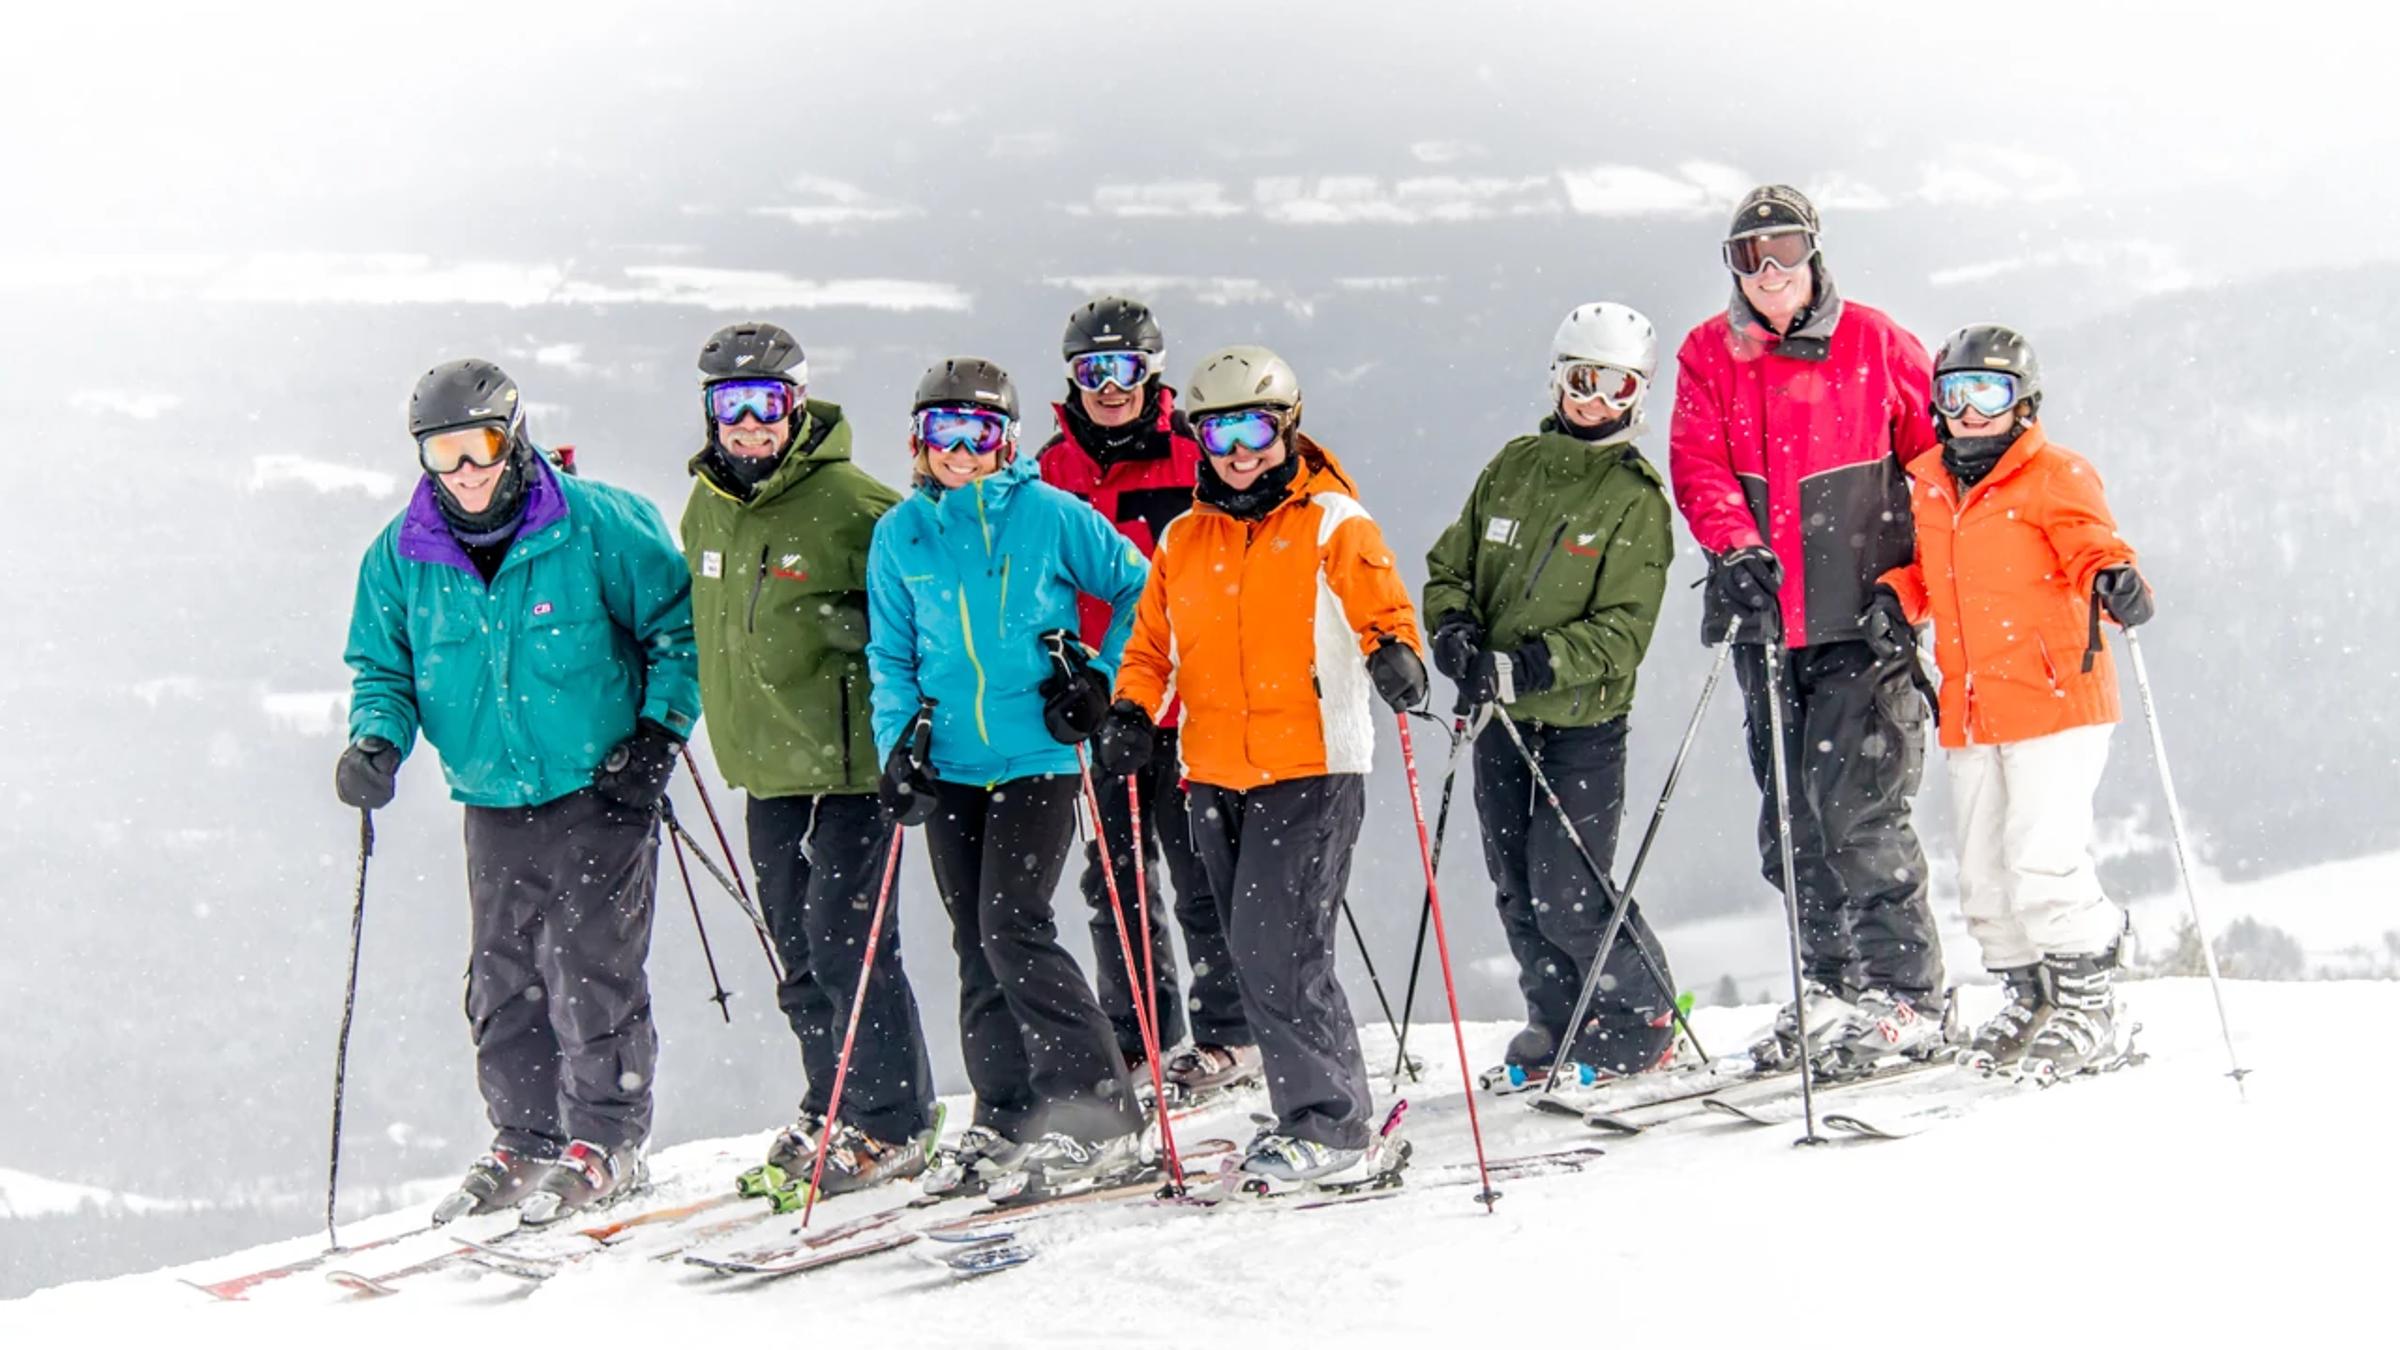 Group of skiers with Sugarbush employees